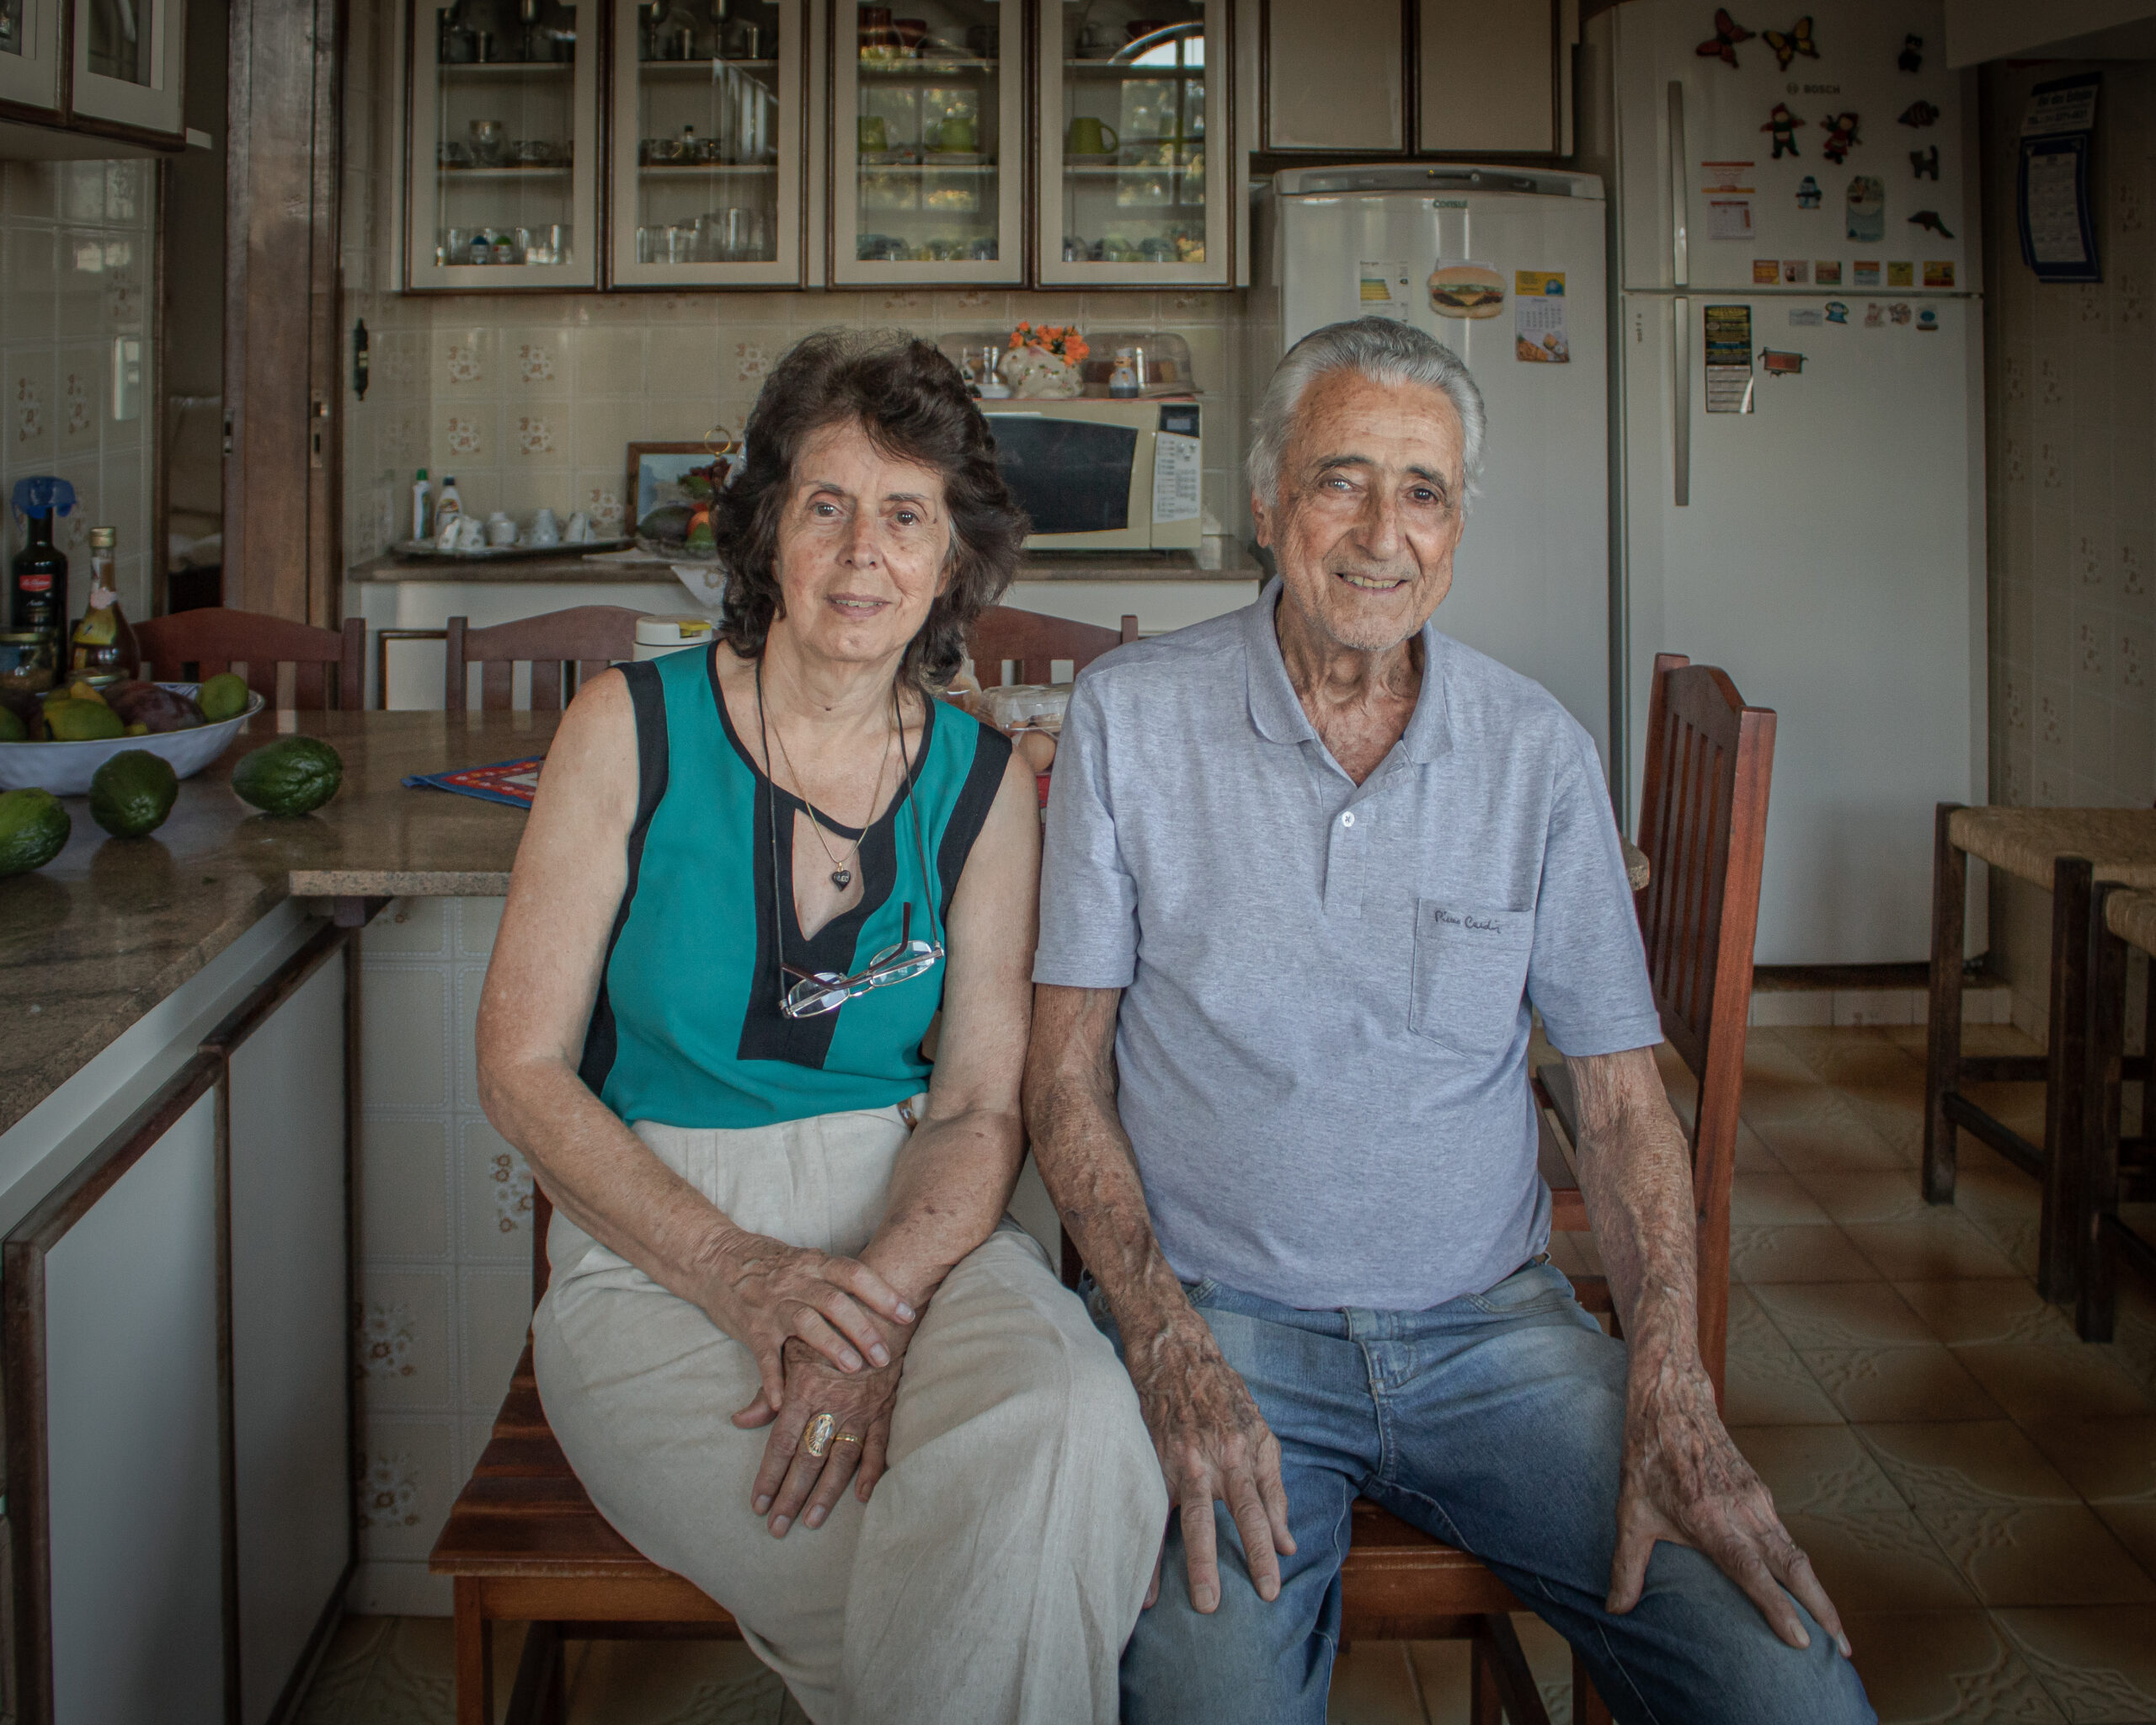 My grandmother Elvira and my grandfather Edivaldo sit side by side in the kitchen. It was the last photo I took of them together before my grandfather passed.